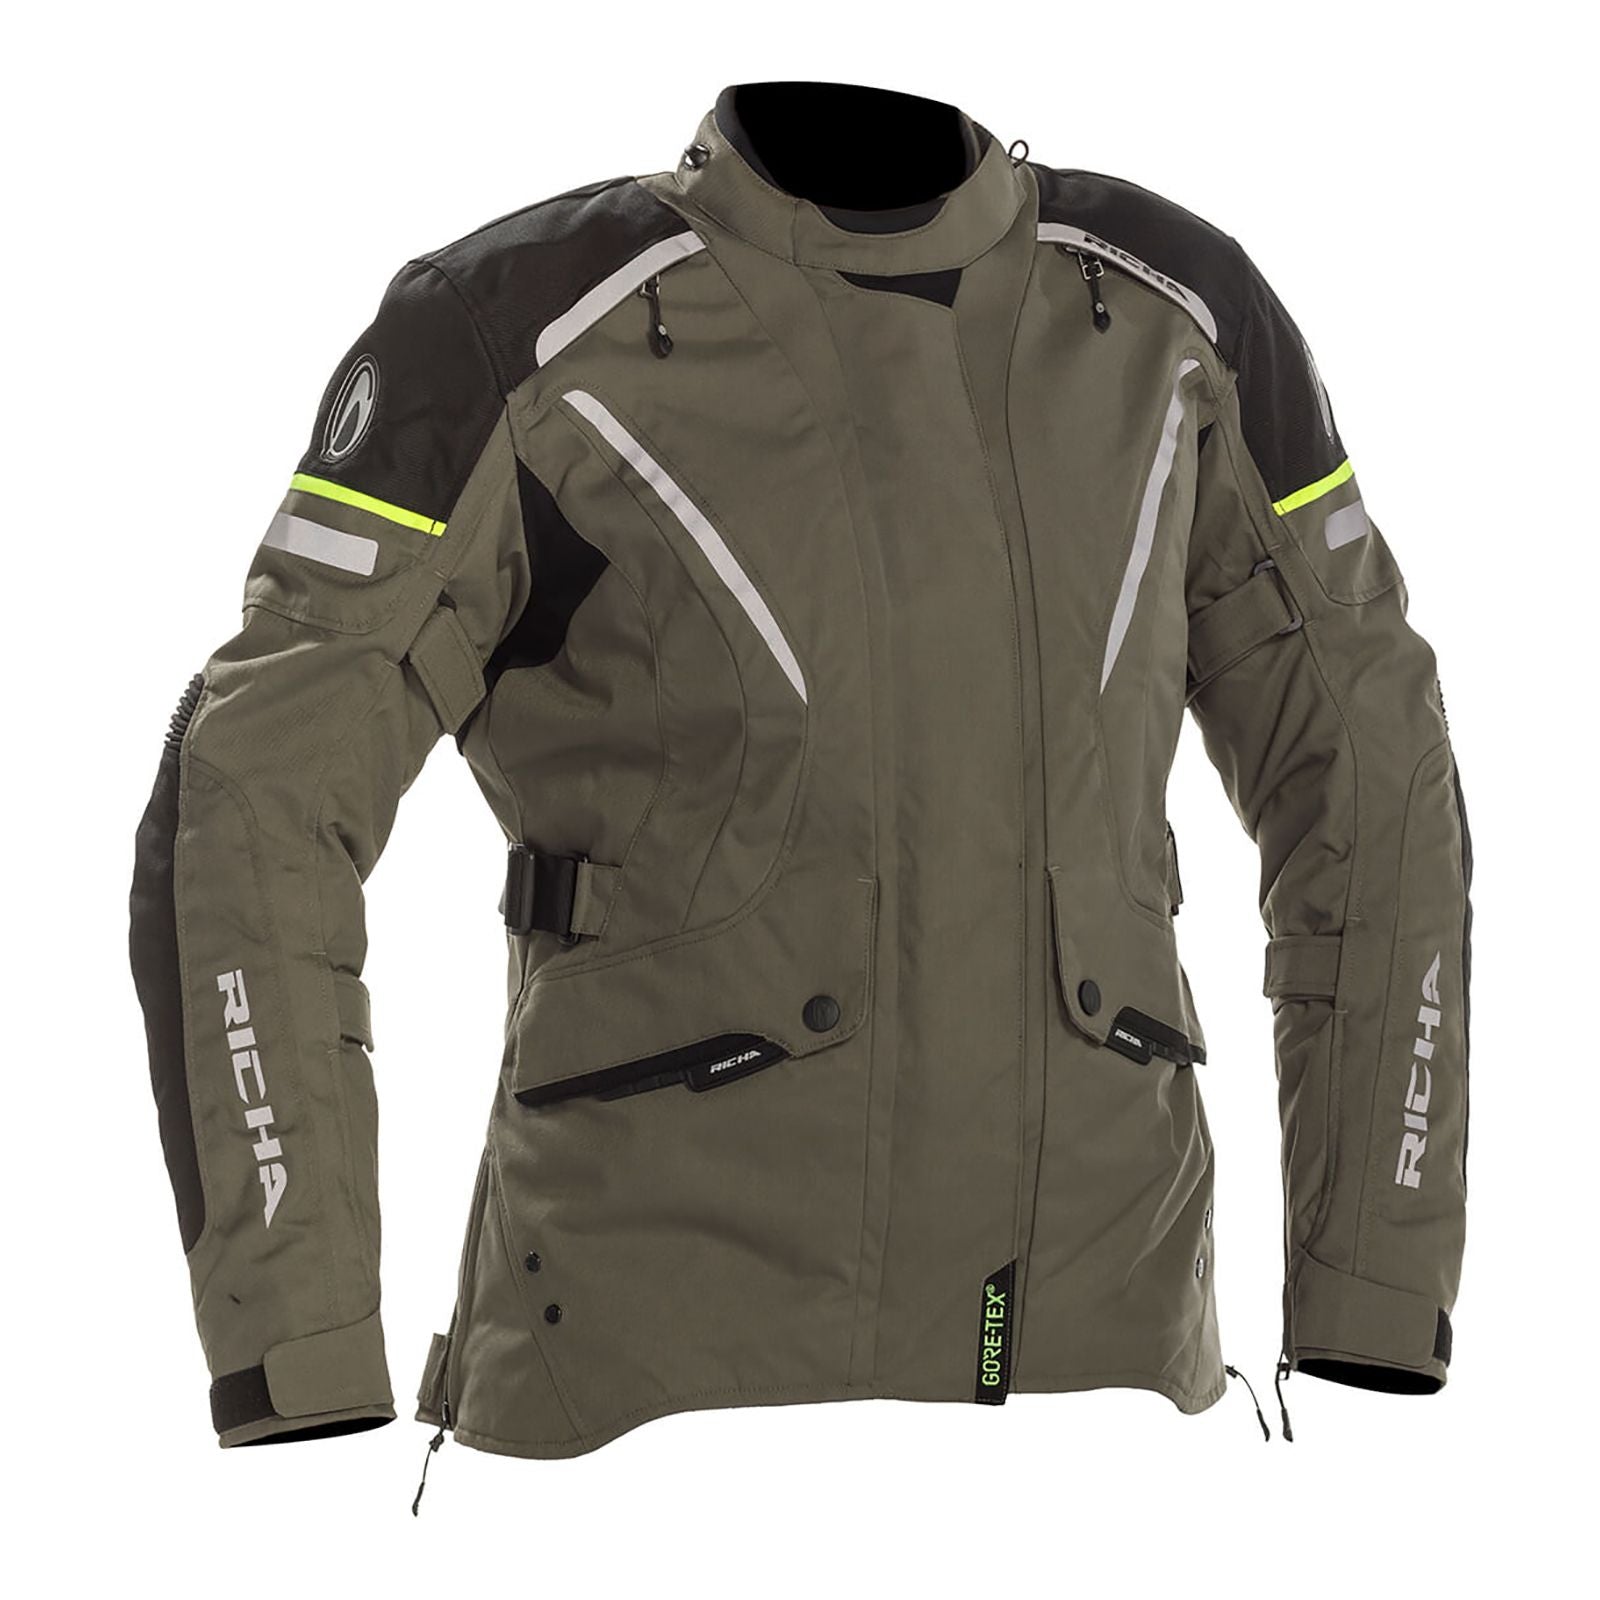 New RICHA CYCLONE LADIES JACKET GORE-TEX TIT MED RATJCYLGM